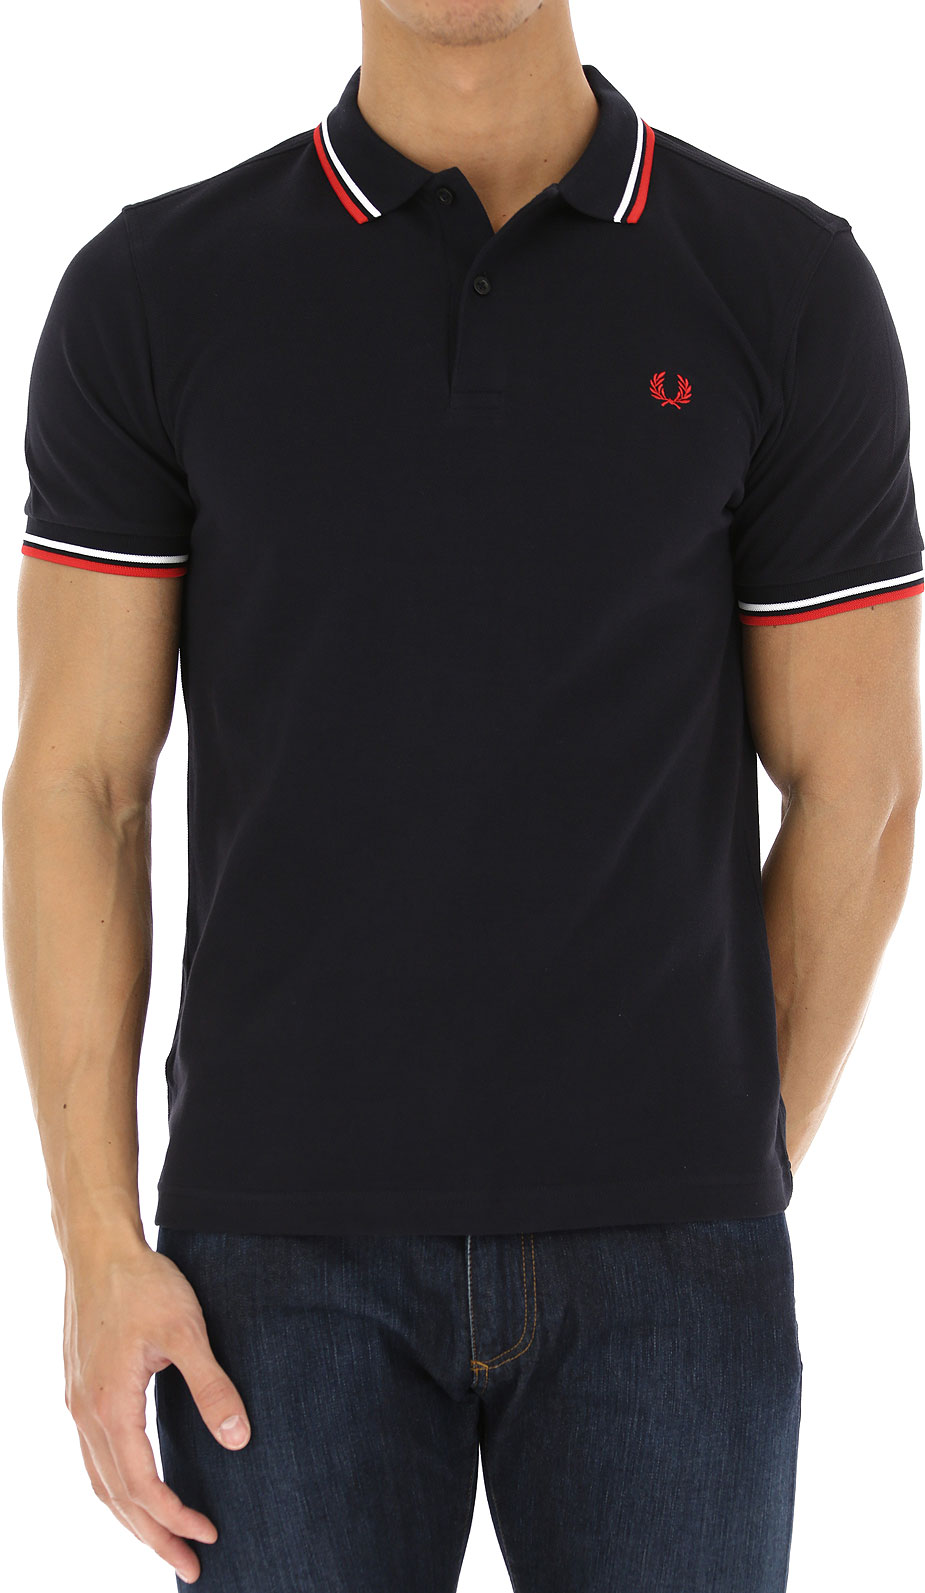 Mens Clothing Fred Perry, Style code: m3600-471-